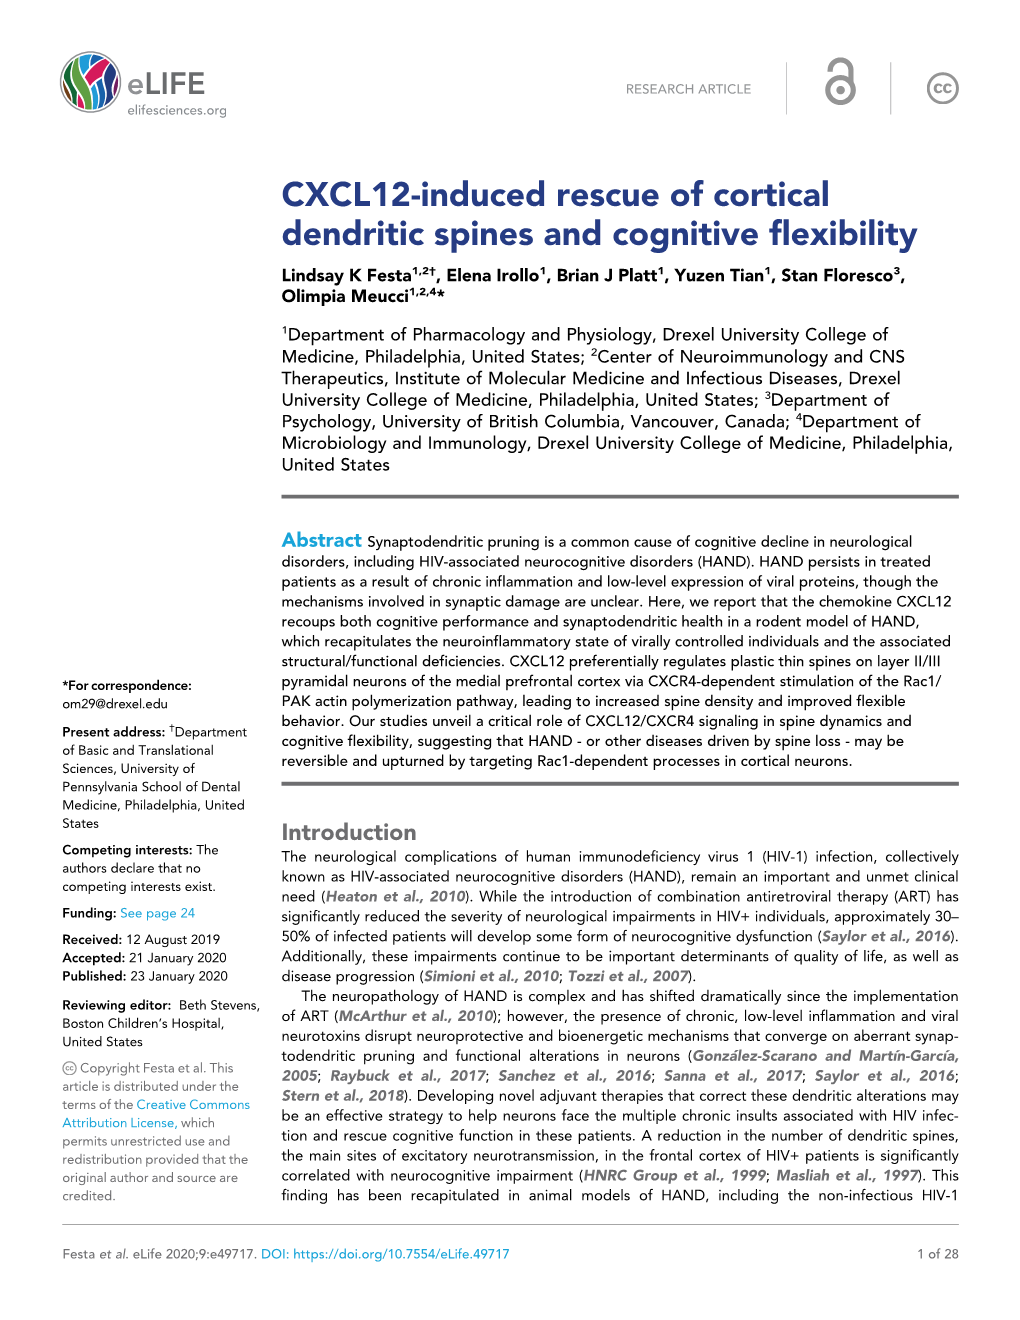 CXCL12-Induced Rescue of Cortical Dendritic Spines and Cognitive